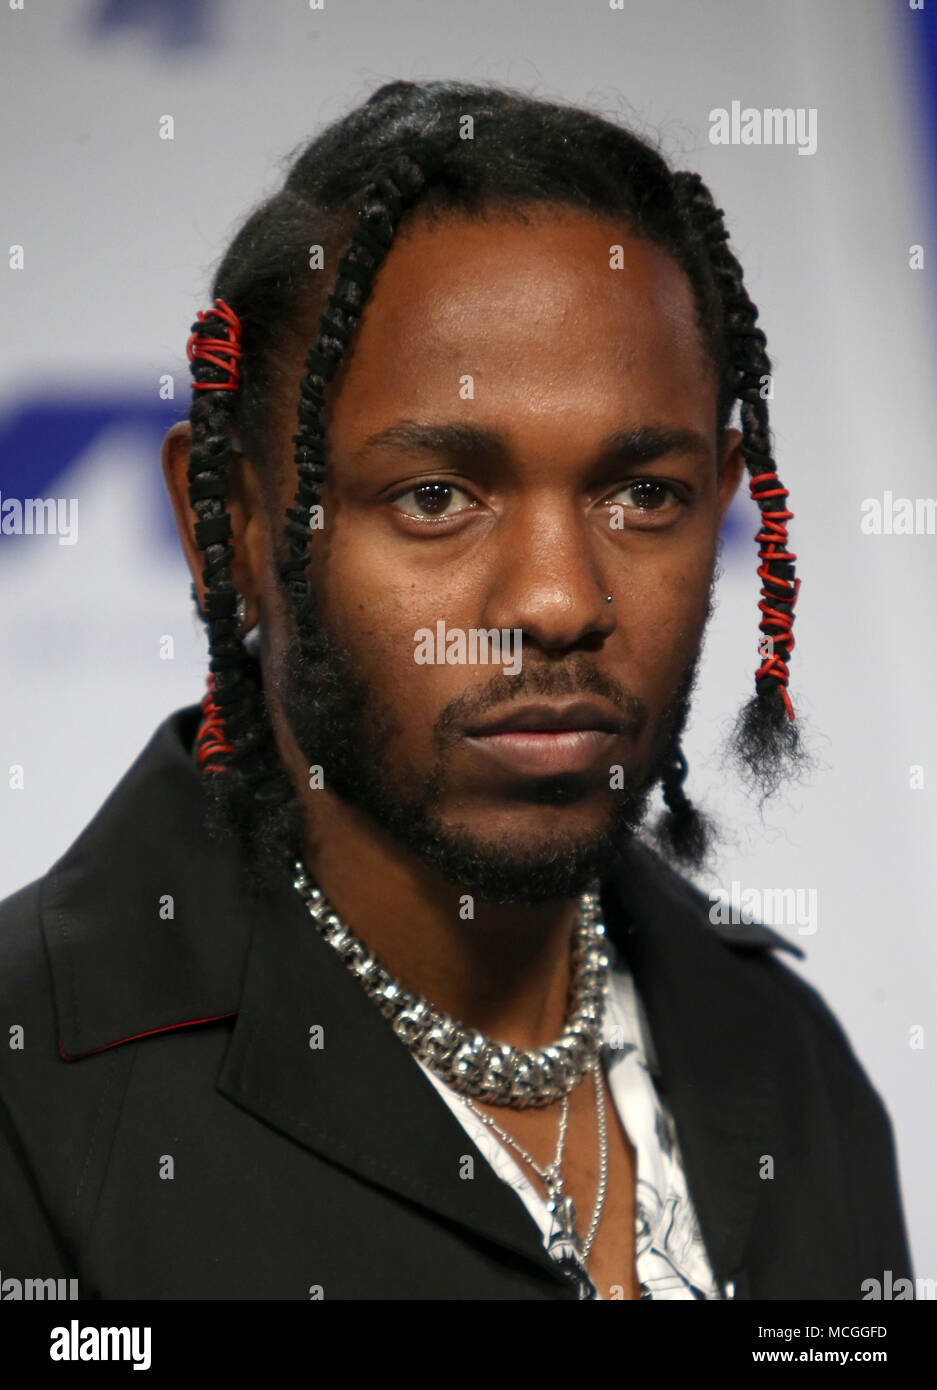 April 11, 2018 - (File Photo) - Kendrick Lamar was awarded the 2018 Pulitzer Prize in Music for his fourth studio album, DAMN. PICTURED: August 27, 2017 - Los Angeles, California, U.S. - KENDRICK LAMAR at the 2017 MTV Video Music Awards held at The Forum. Credit: F. Sadou/AdMedia/ZUMA Wire/Alamy Live News Stock Photo